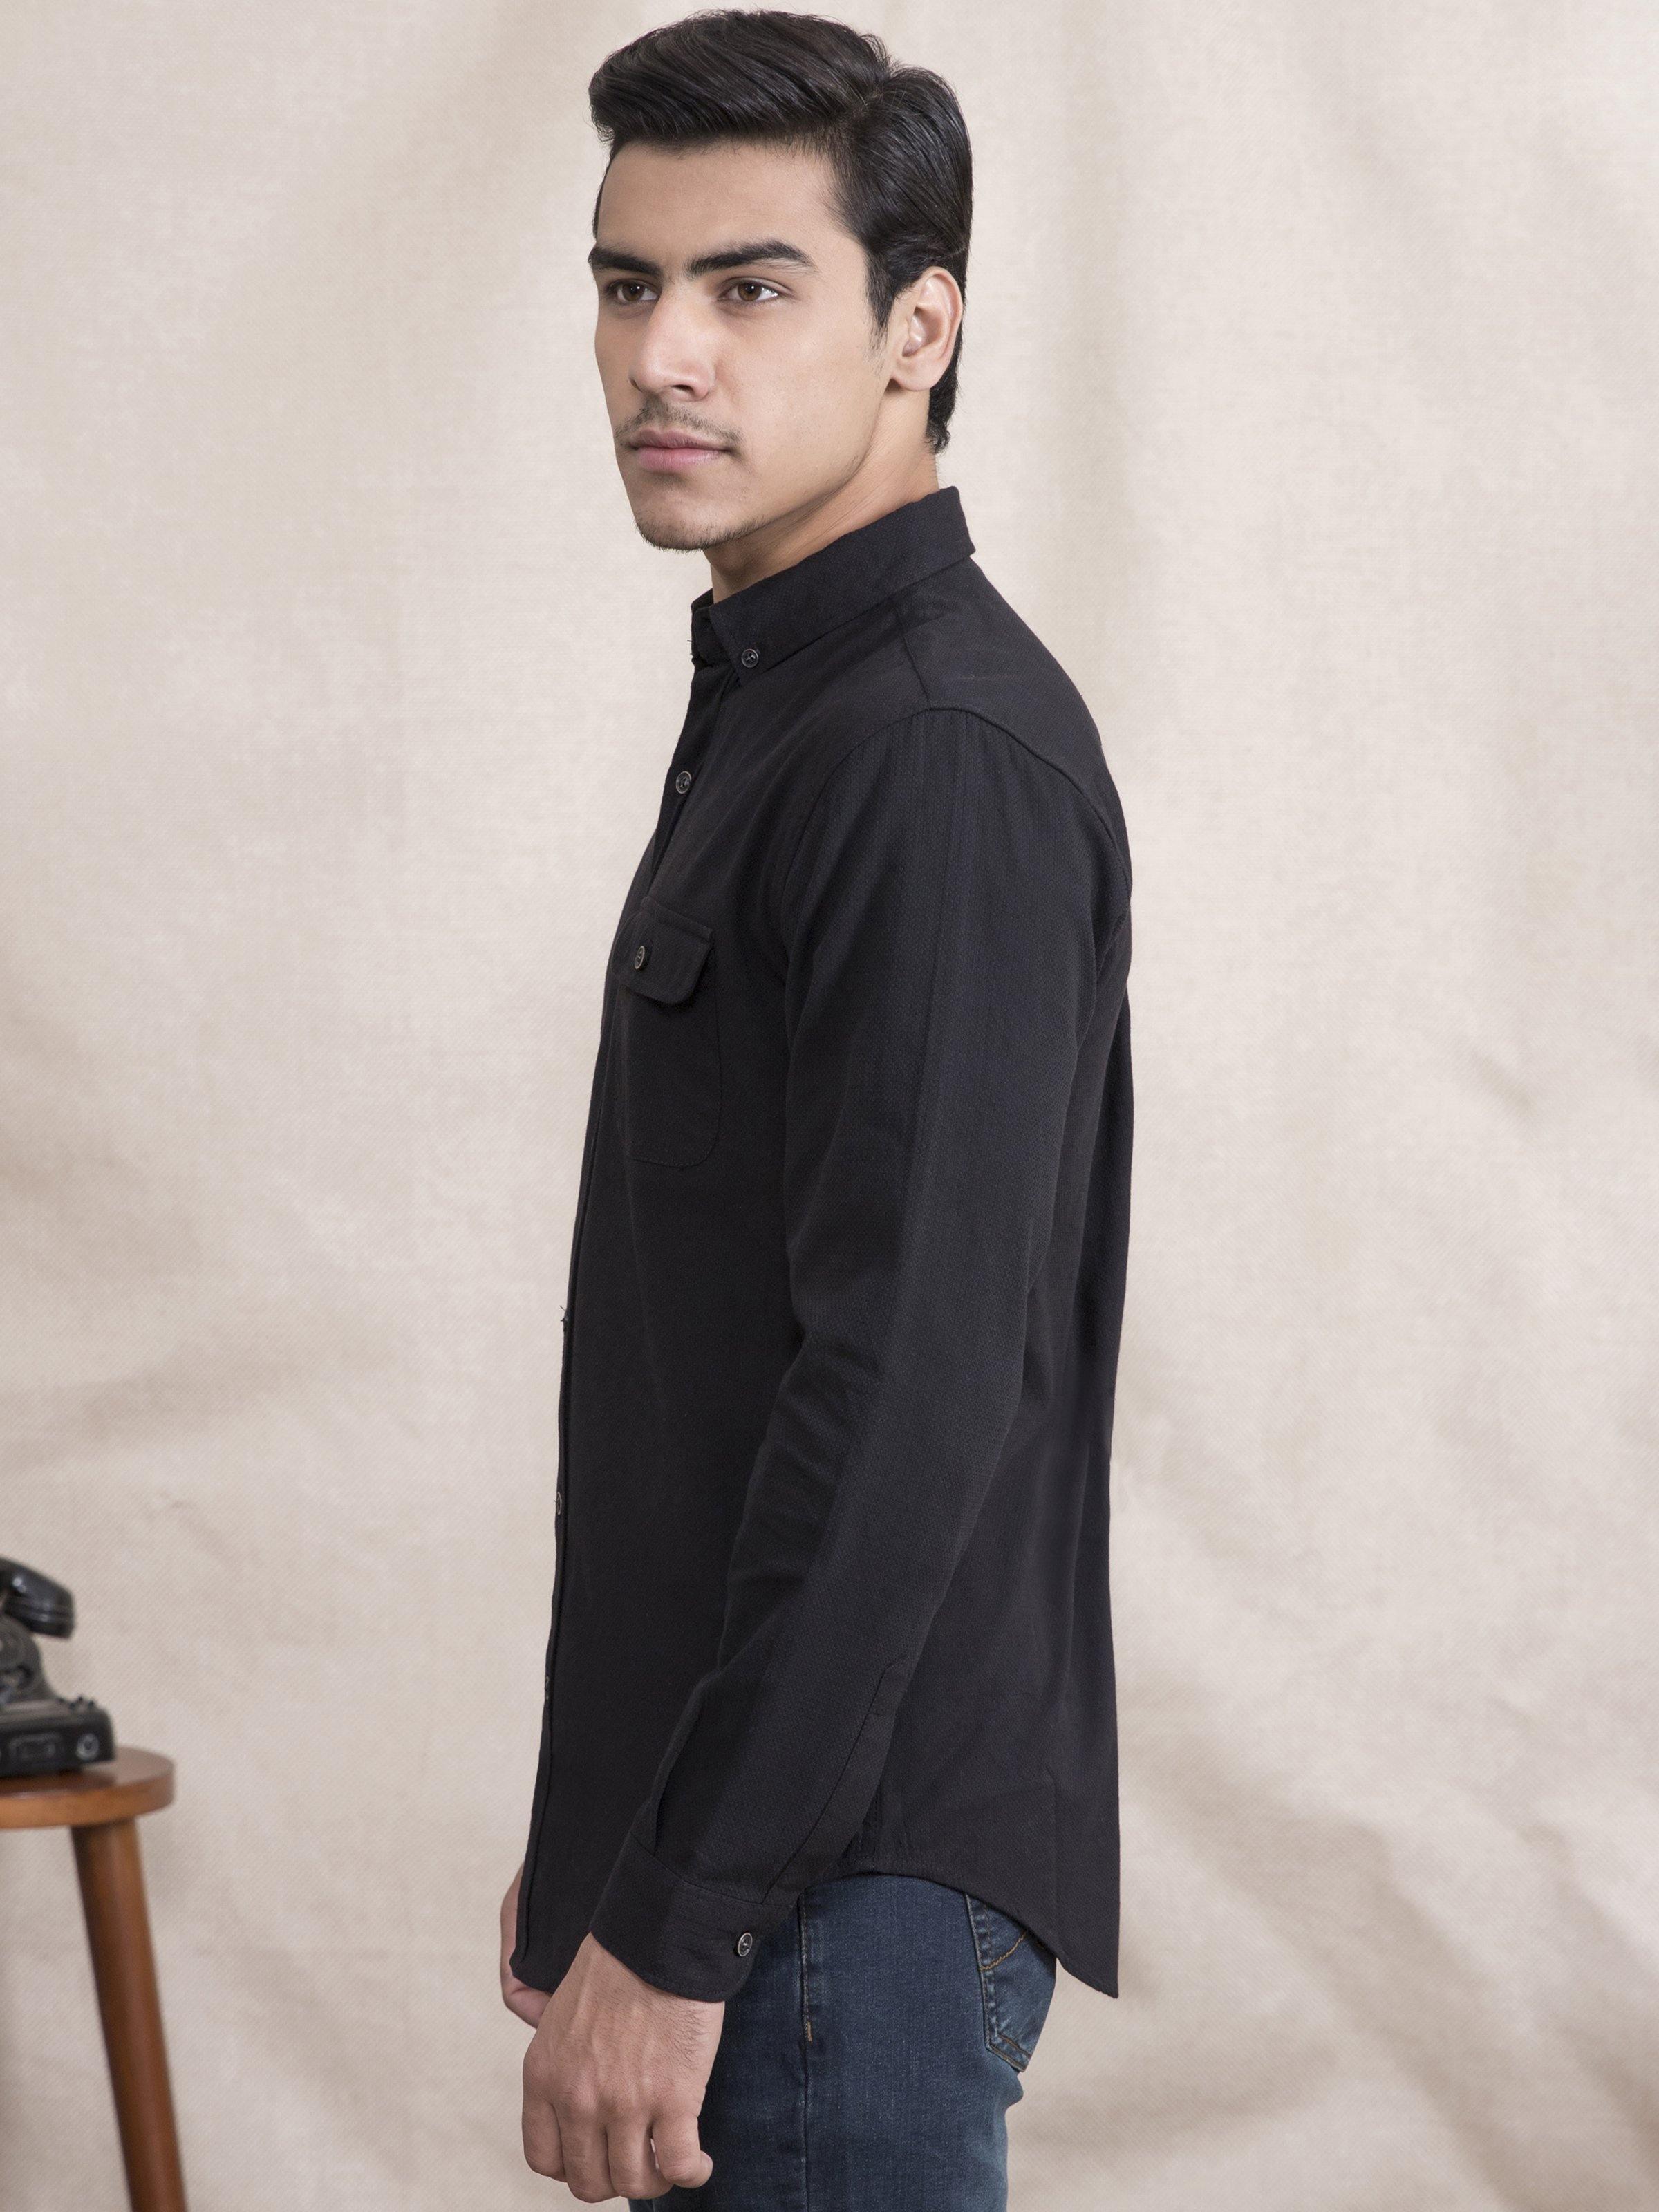 CASUAL SHIRT  SLIM FIT FULL SLEEVE BLACK at Charcoal Clothing